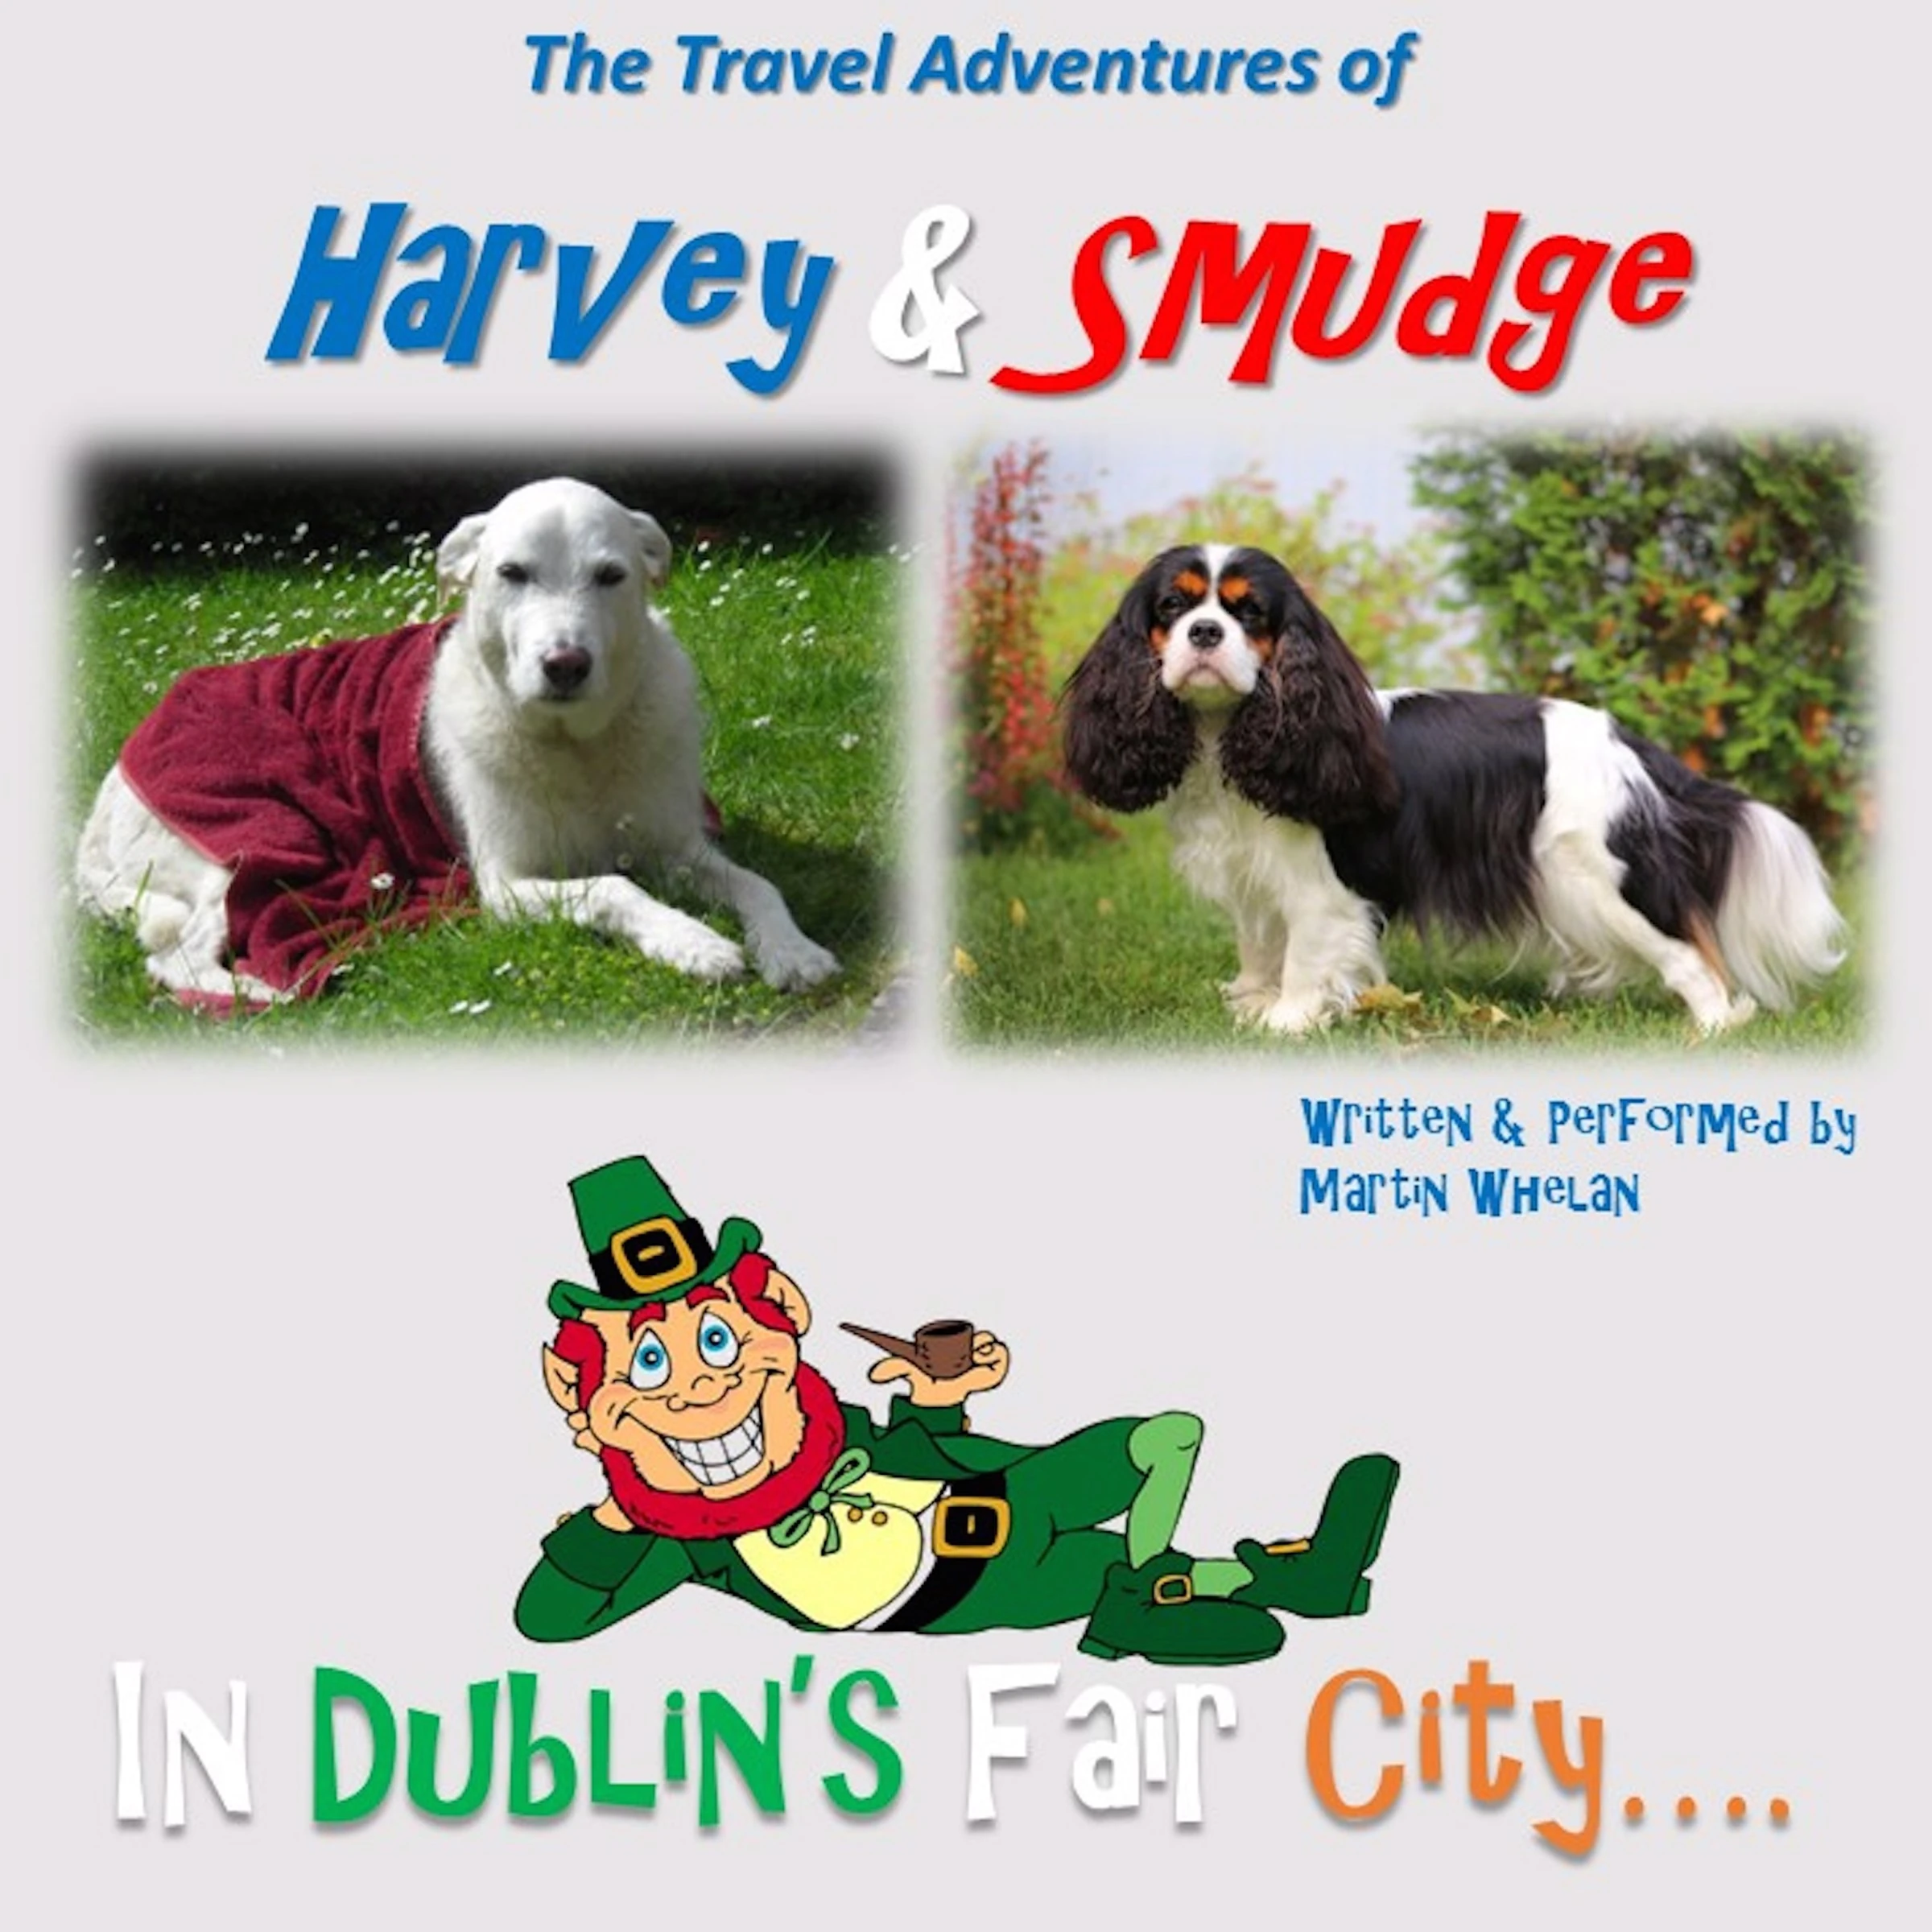 The Travel Adventures of Harvey & Smudge - In Dublin's Fair City Audiobook by Martin Whelan